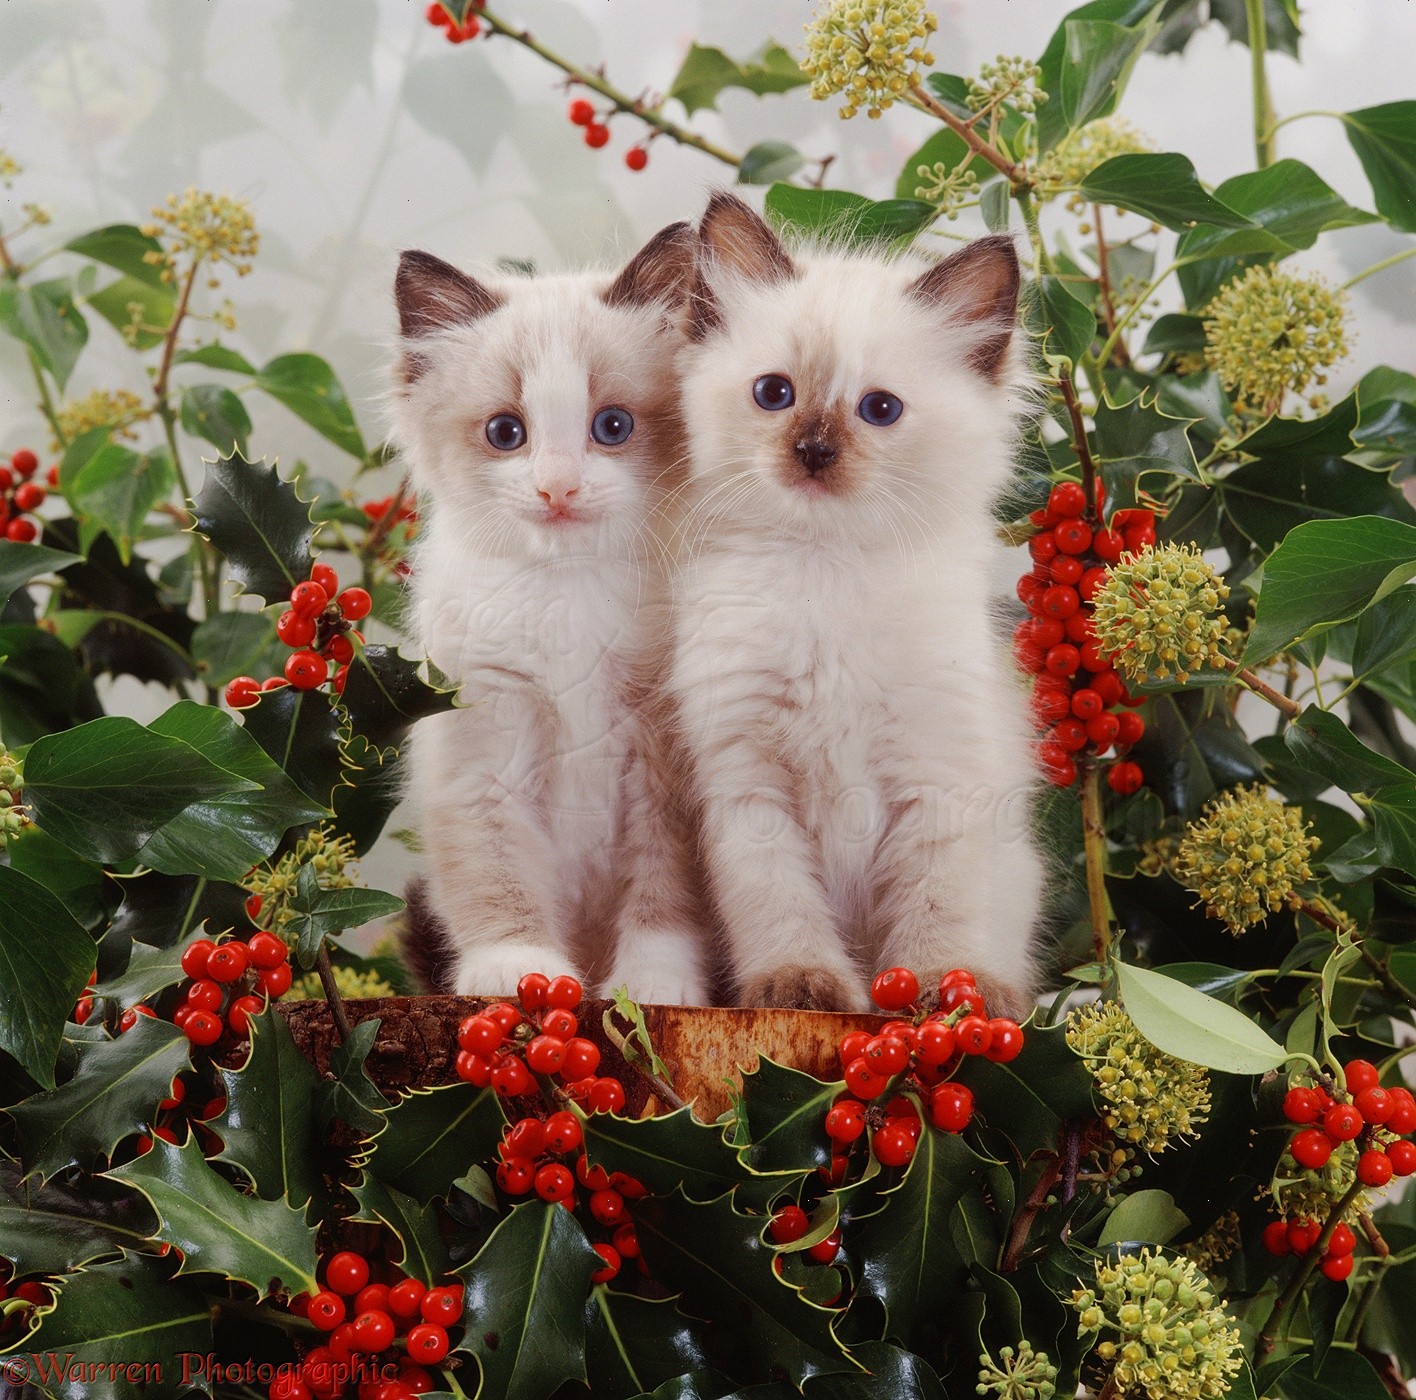 Kittens among holly berries photo WP08203